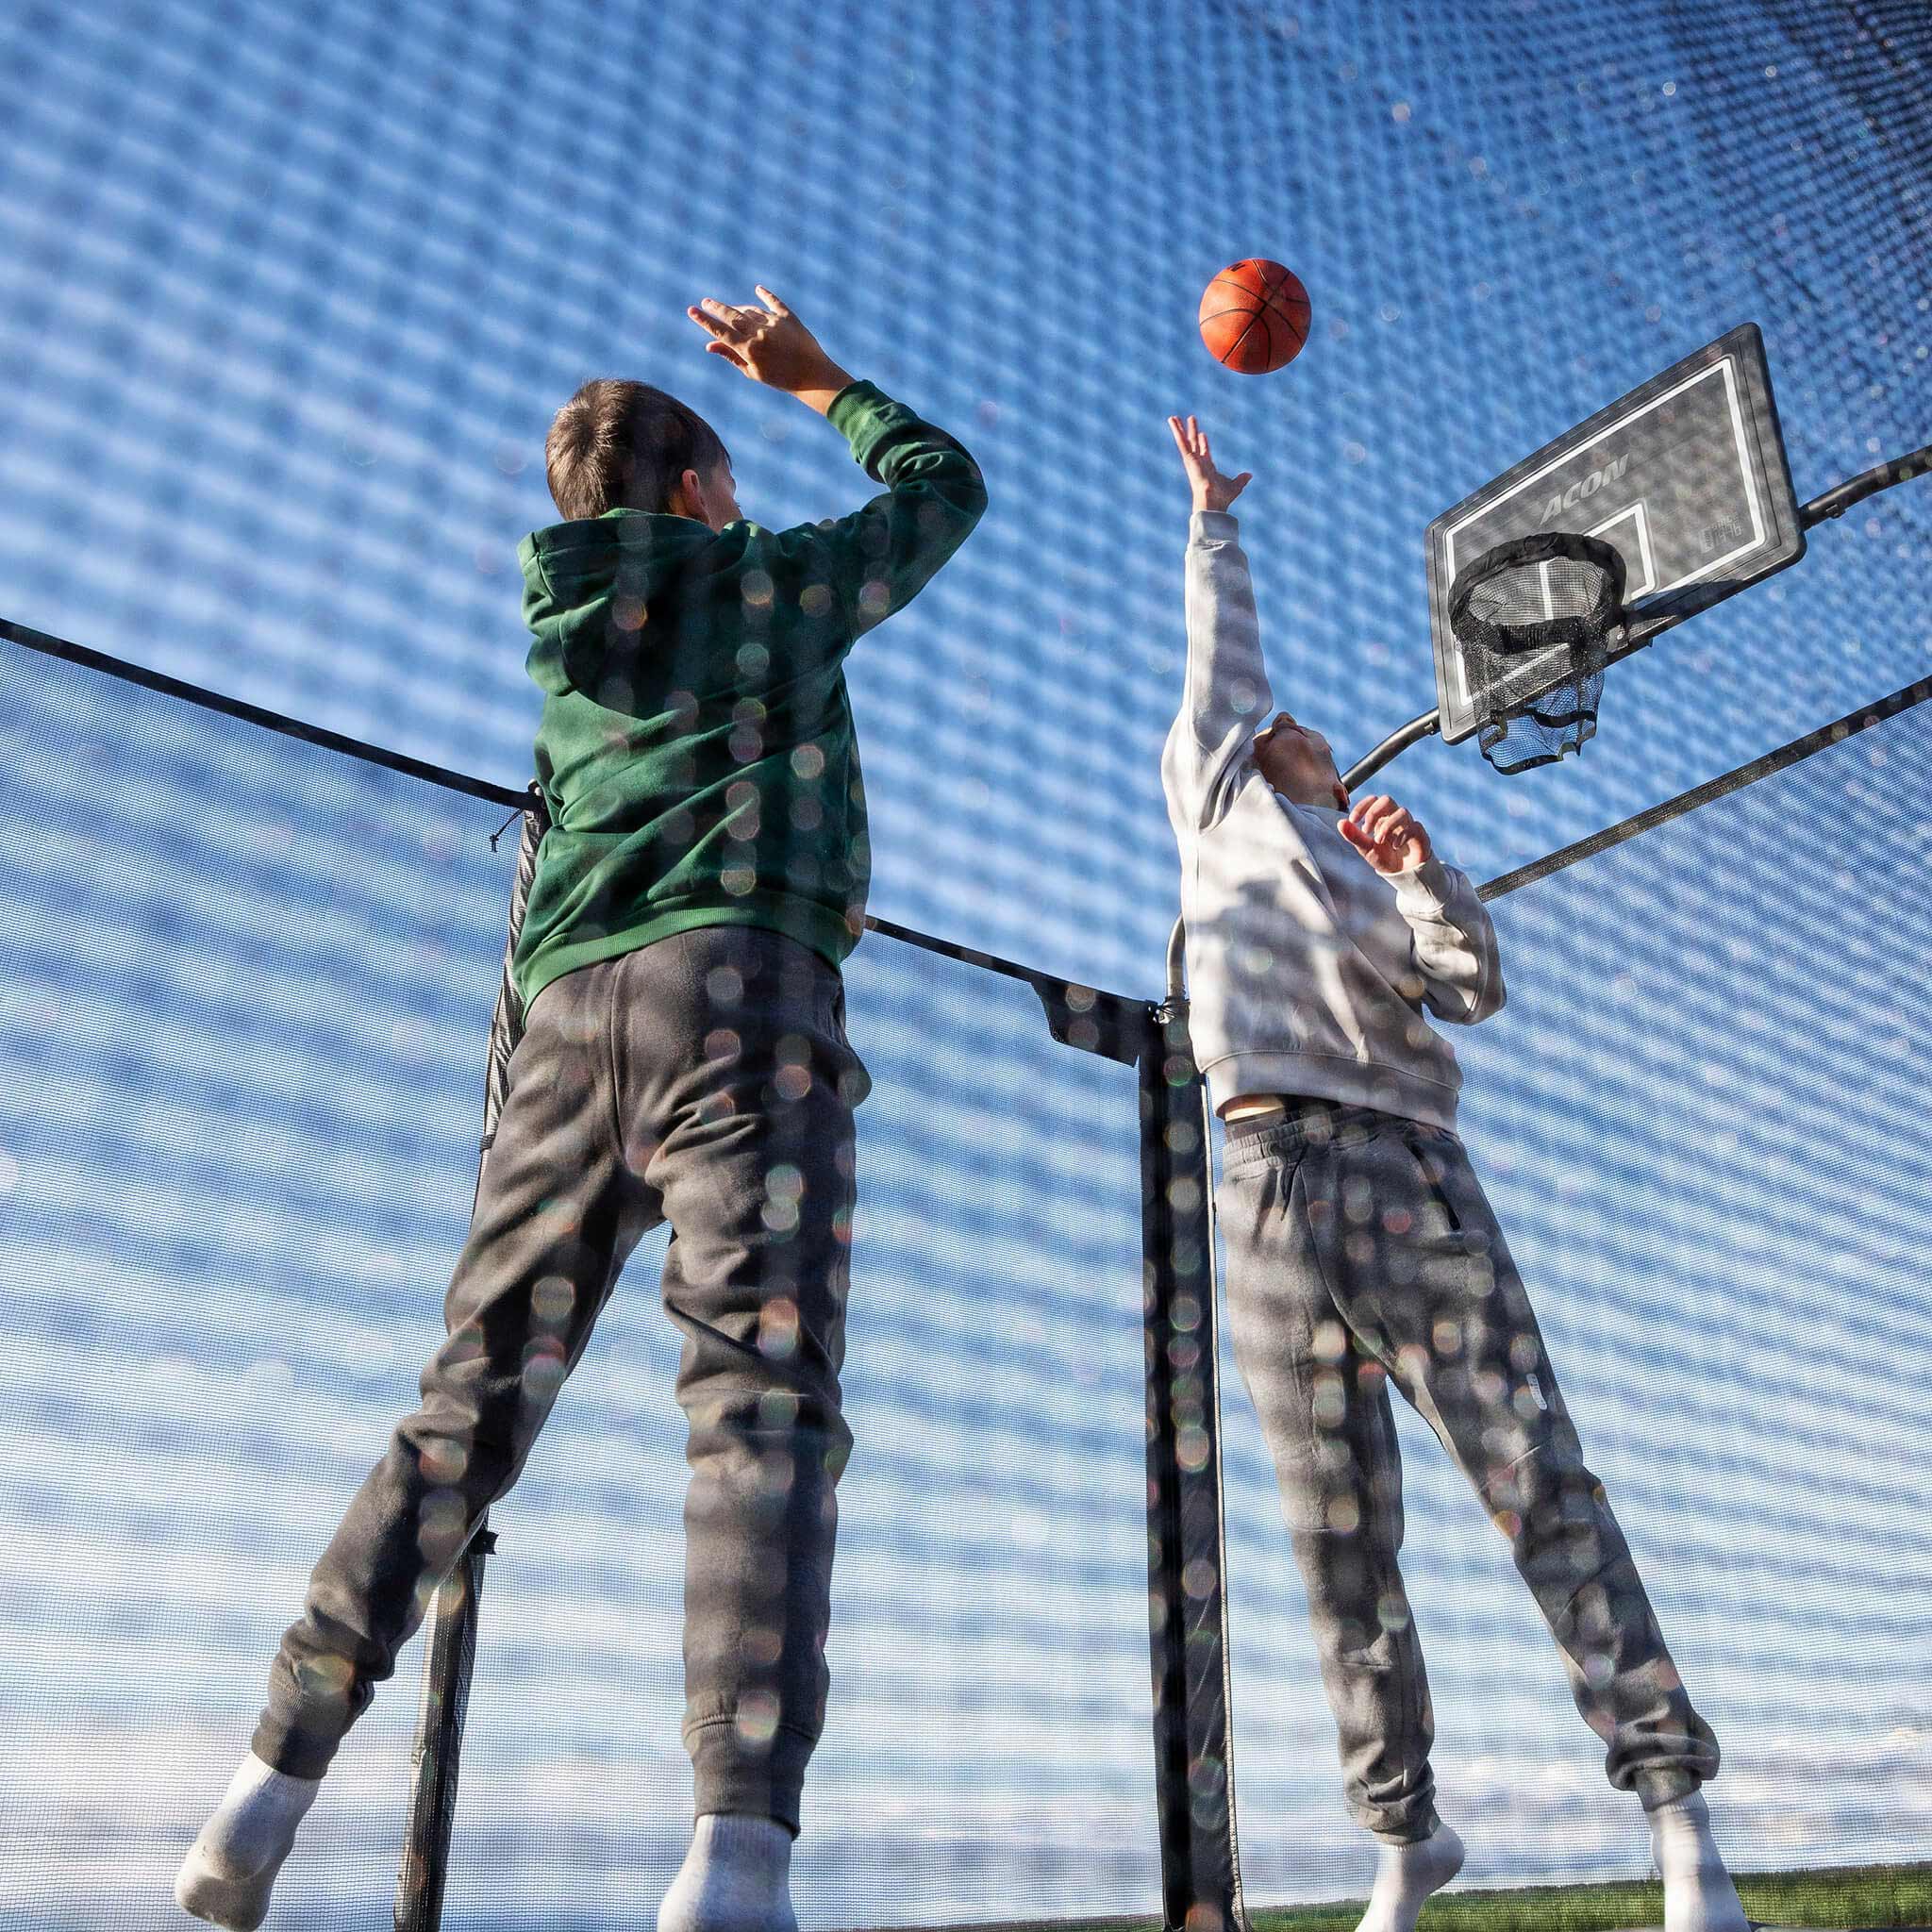 Two boys play basketball on the Acon X Trampoline.